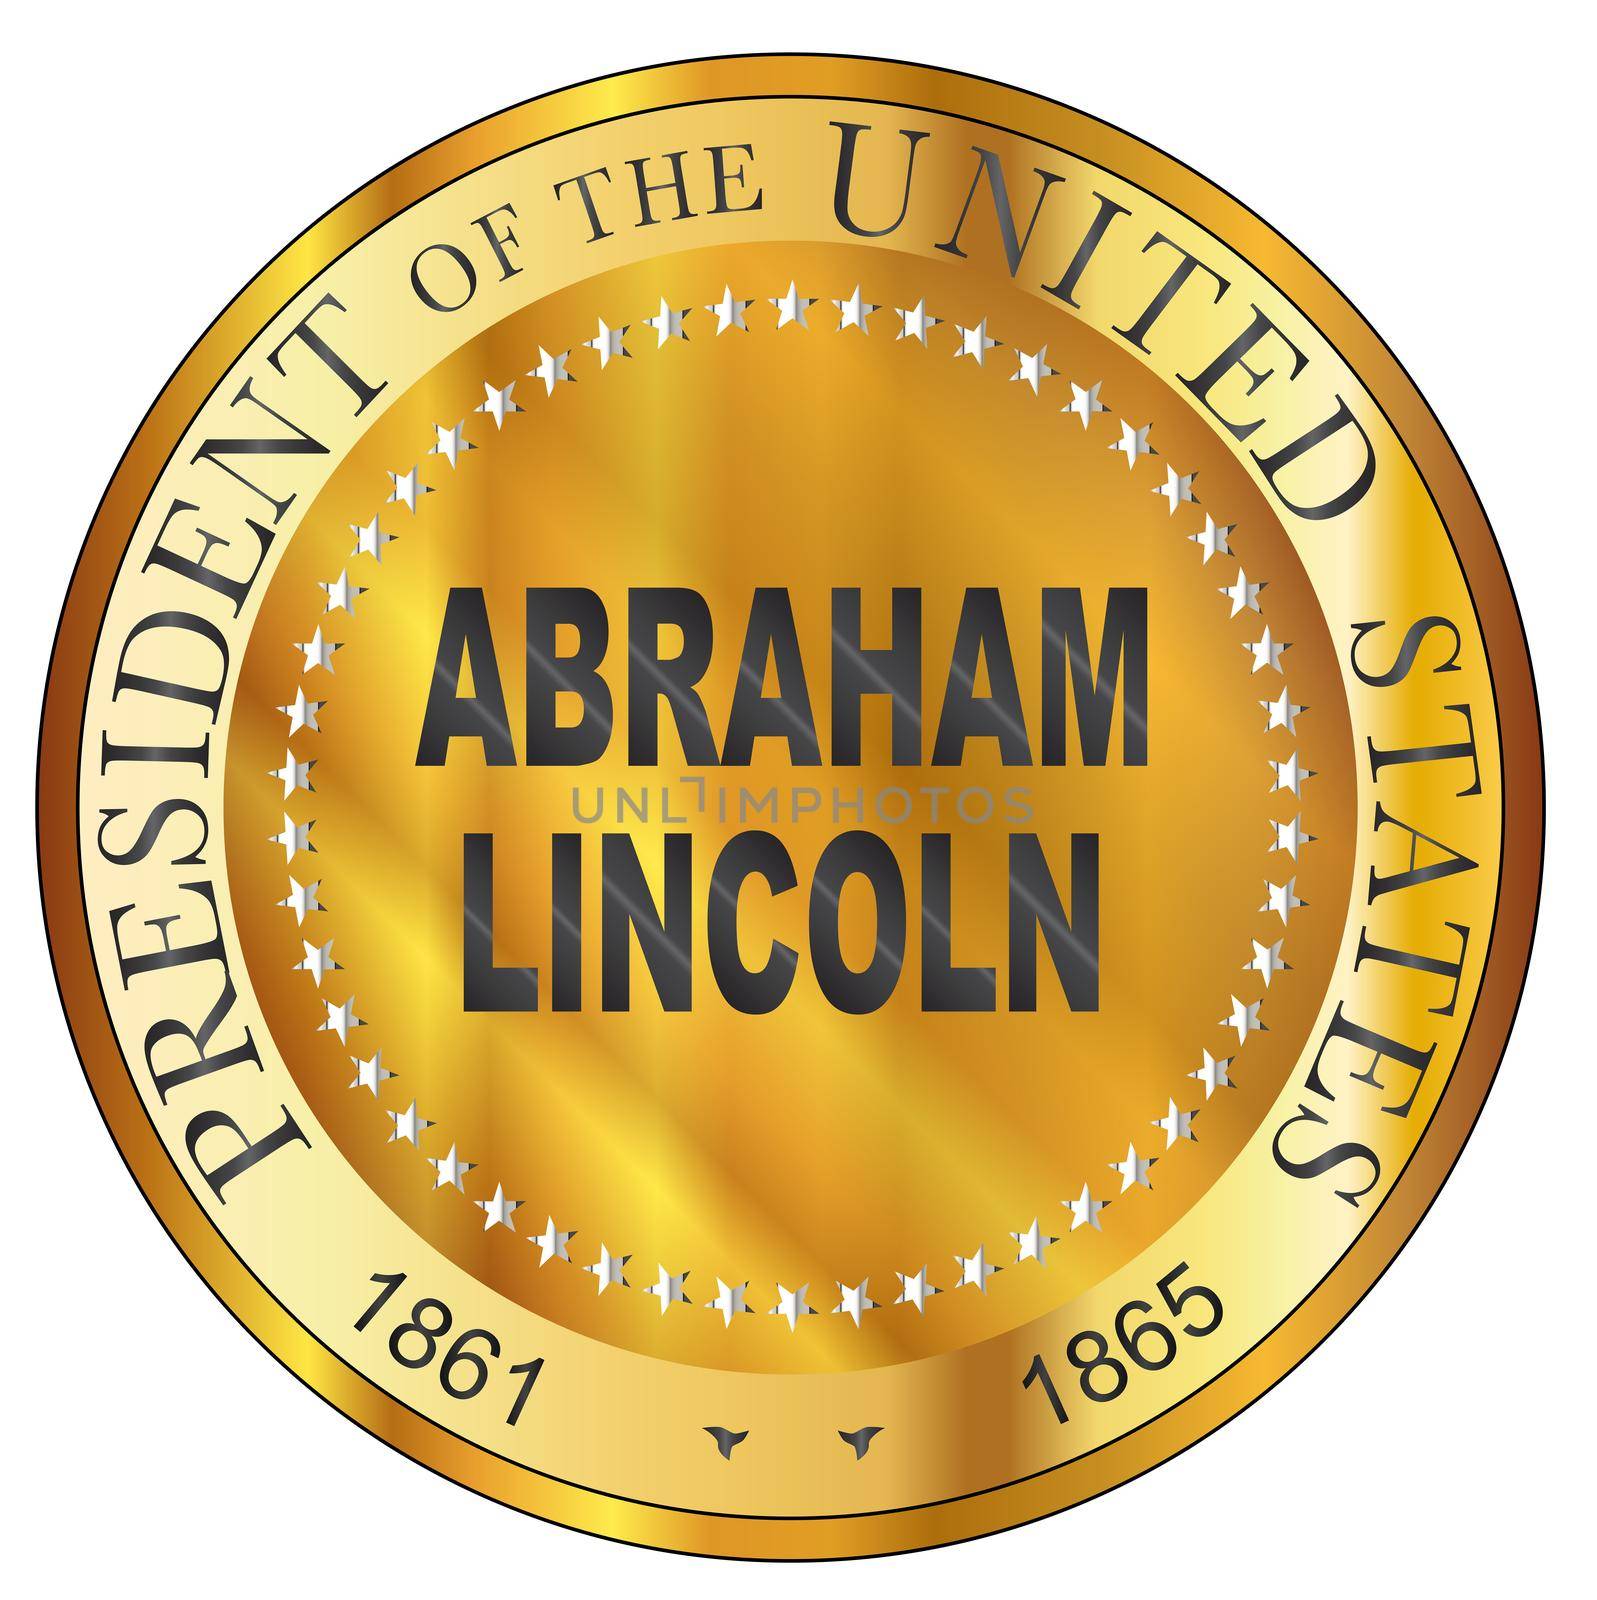 Abraham Lincoln president of the United States of America round stamp